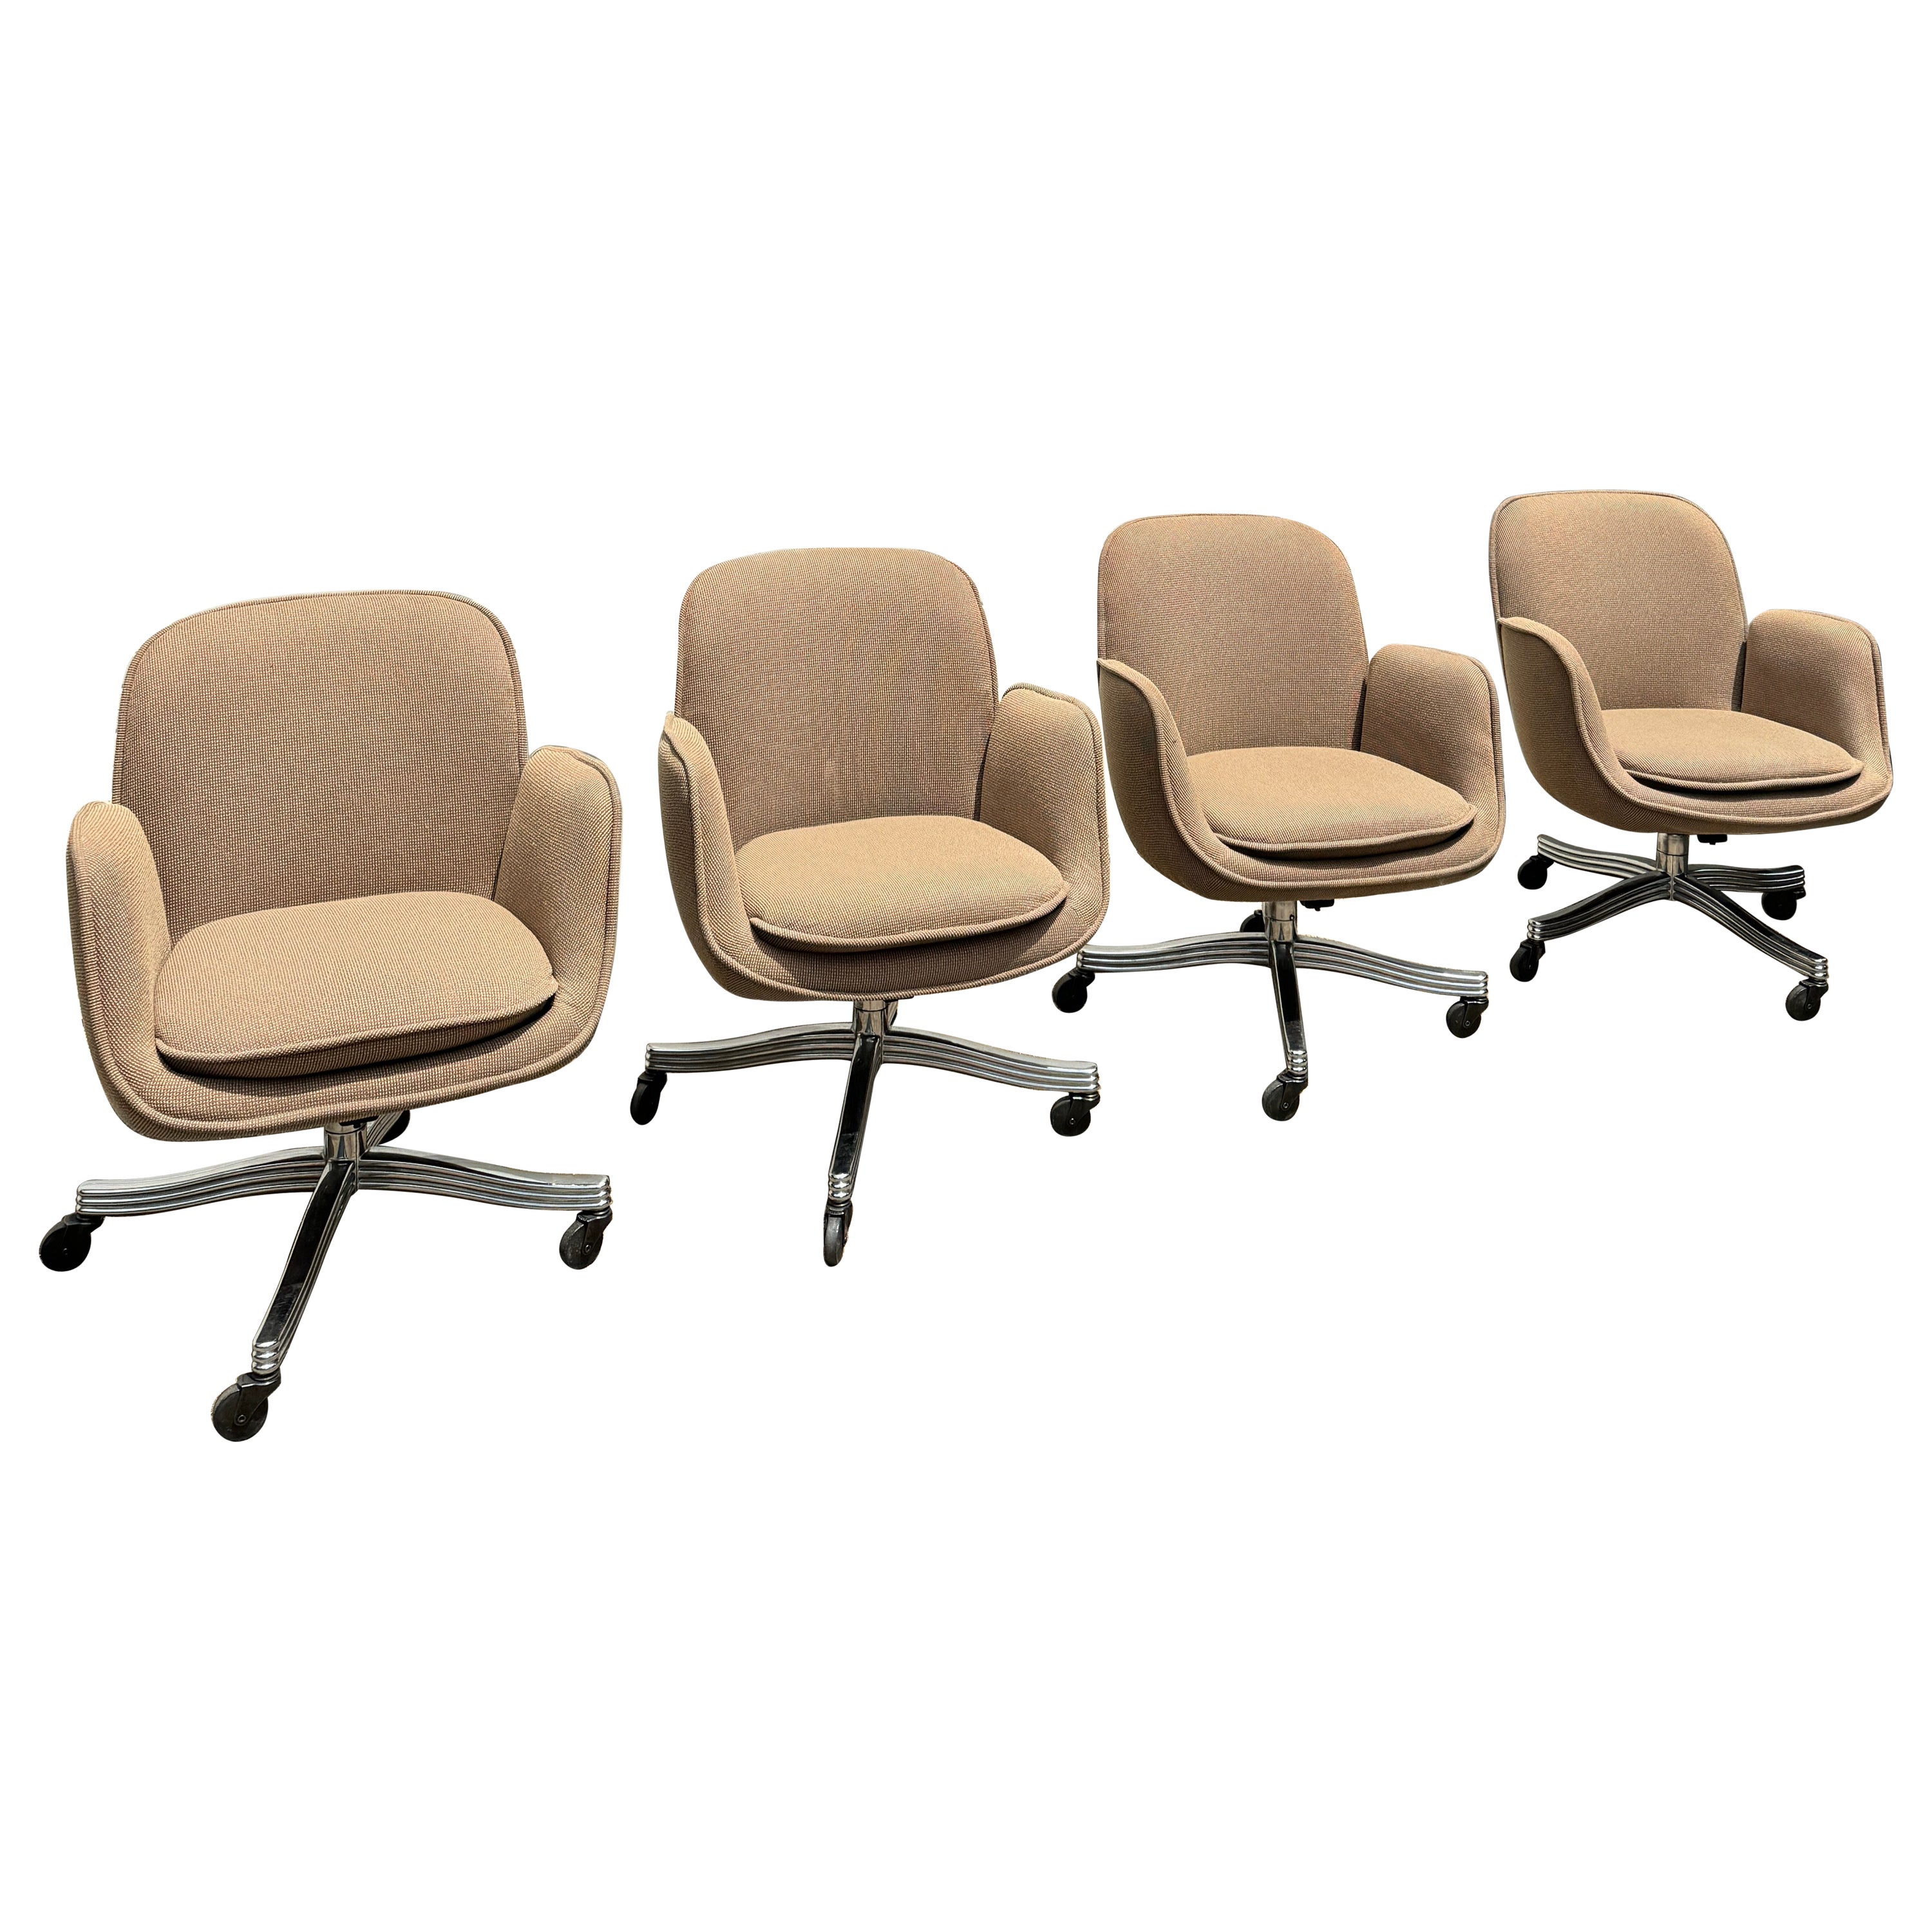 Super comfy set of 4 bucket office chairs by Faultess Doerner, circa 1970s